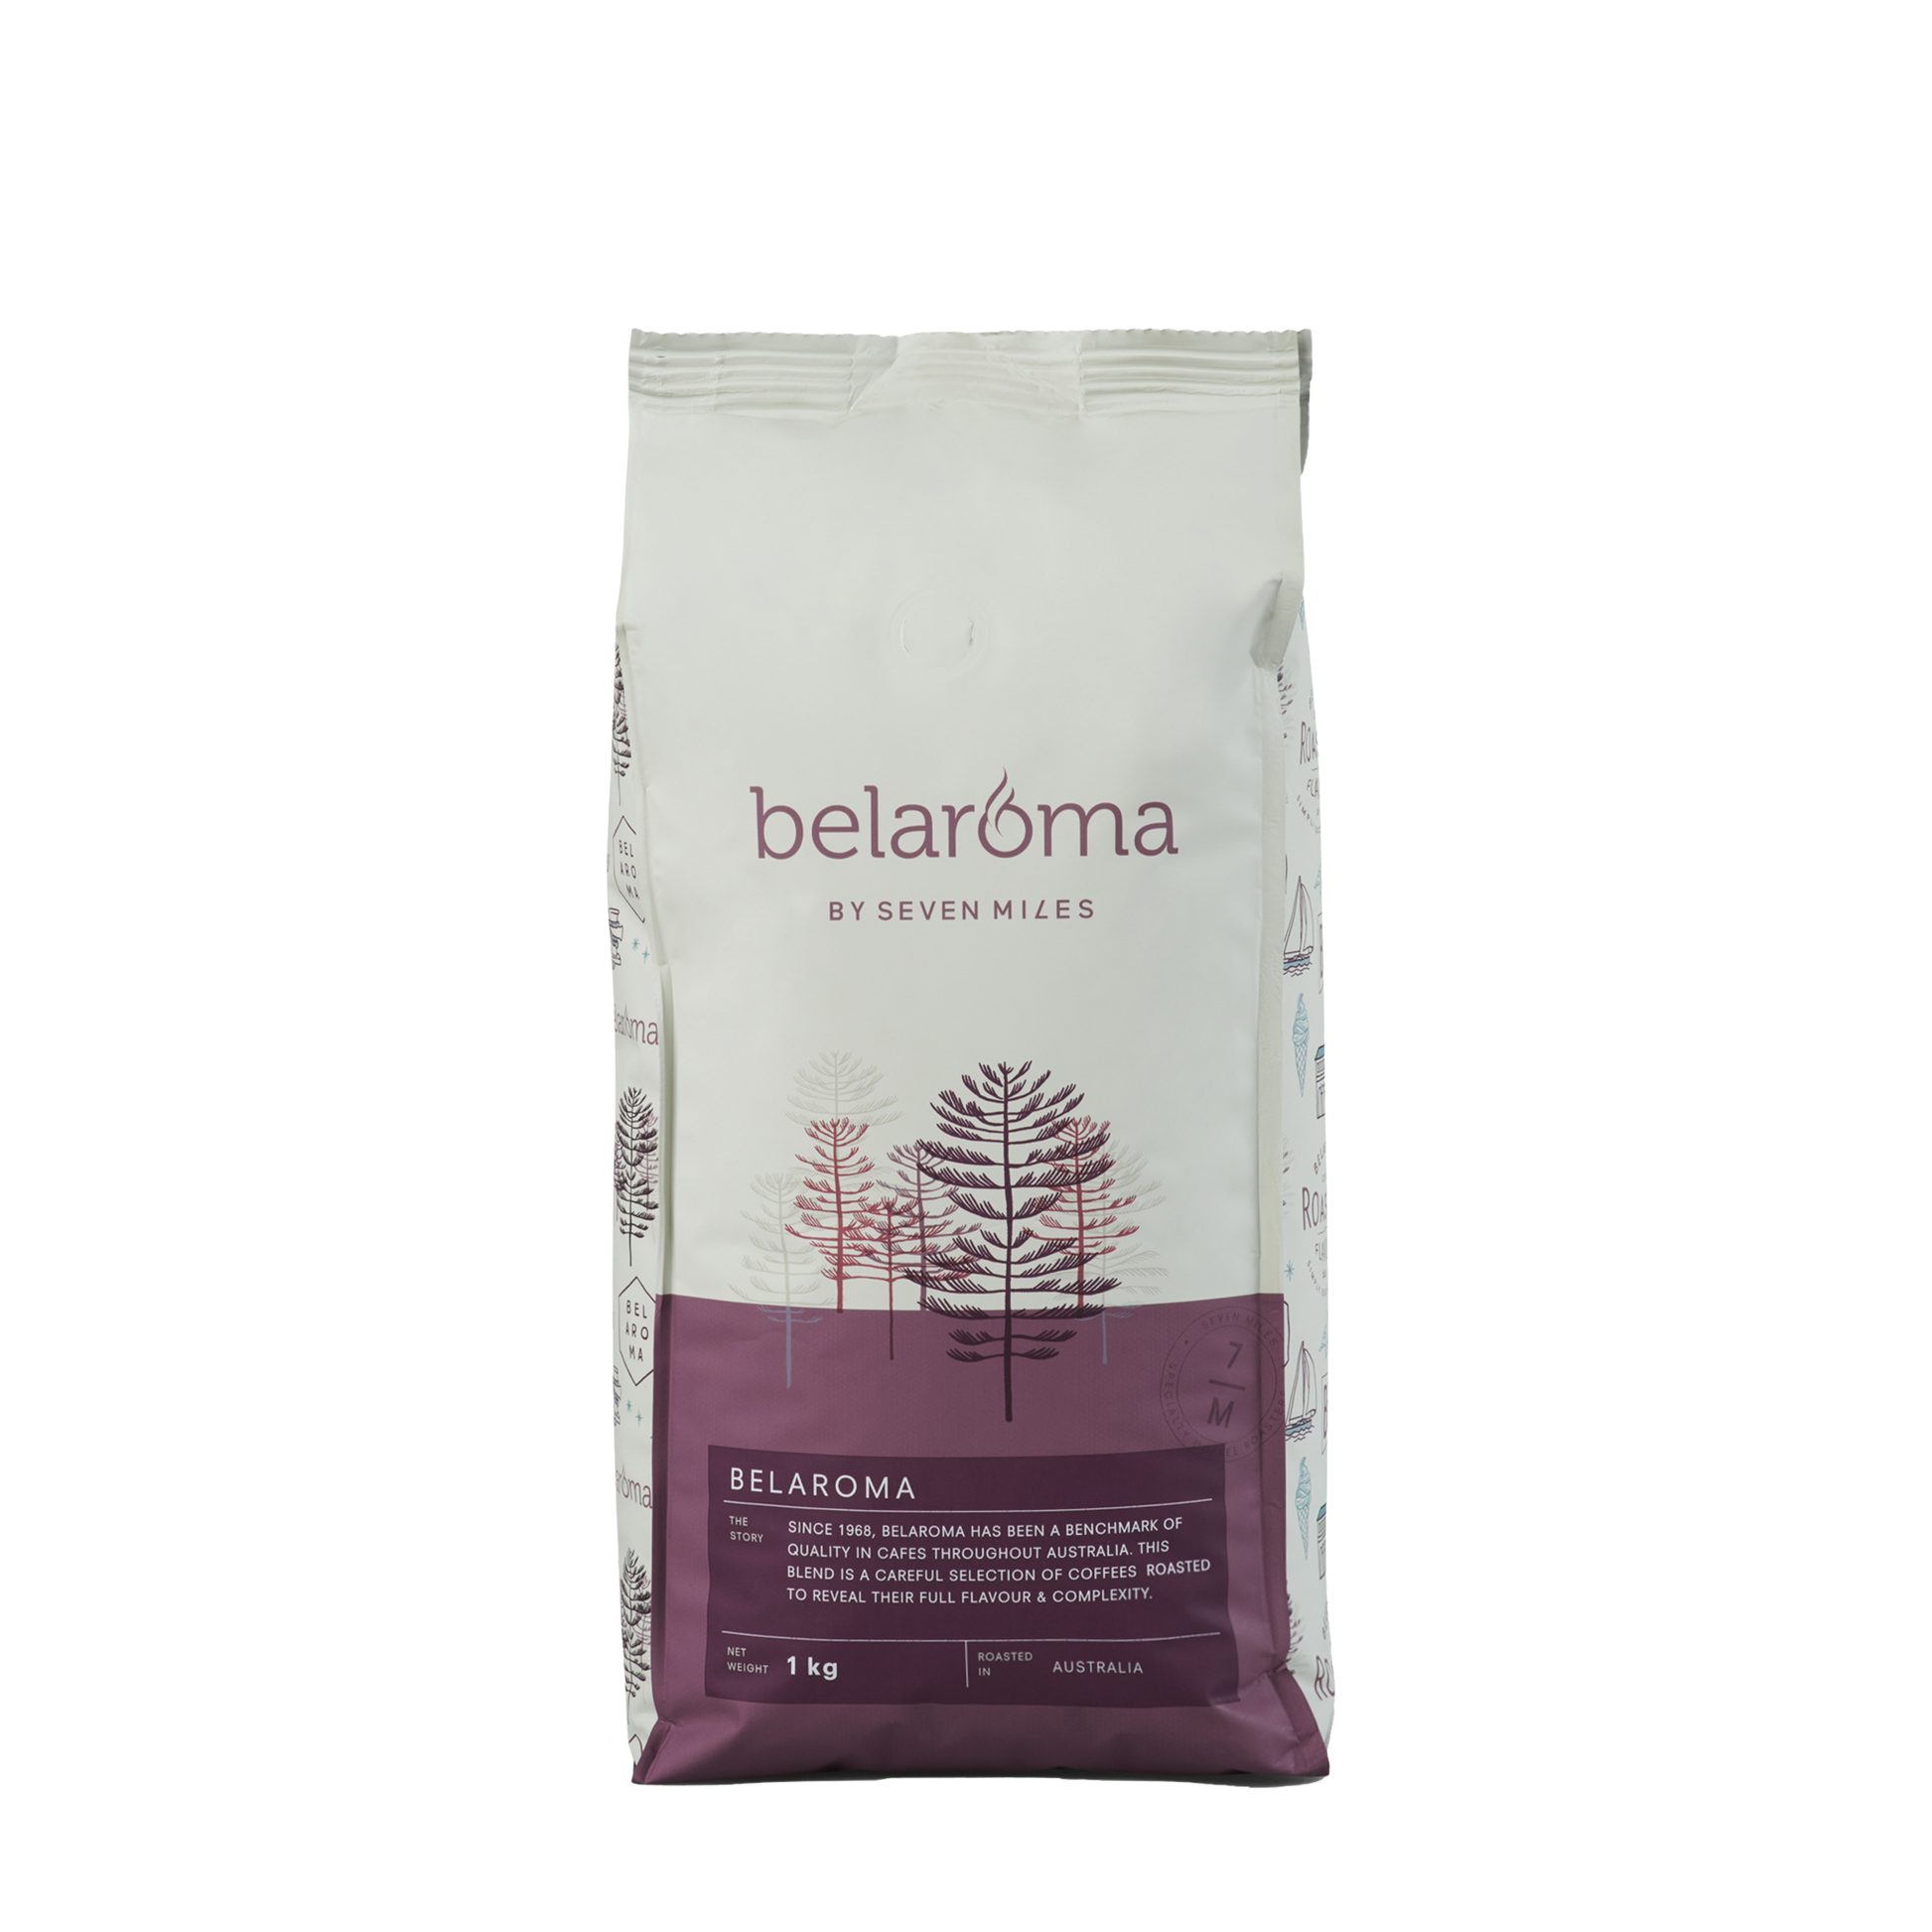 Our Belaroma coffee range consists of four favourite blends: Octavia, No 5, Julius and No 25. Each blend is expertly roasted and blended right here in NSW, Australia with coffees masterfully sourced from the most popular coffee producing countries in the world. Perfect for Latte, Cappuccino, Flat White or just Black.